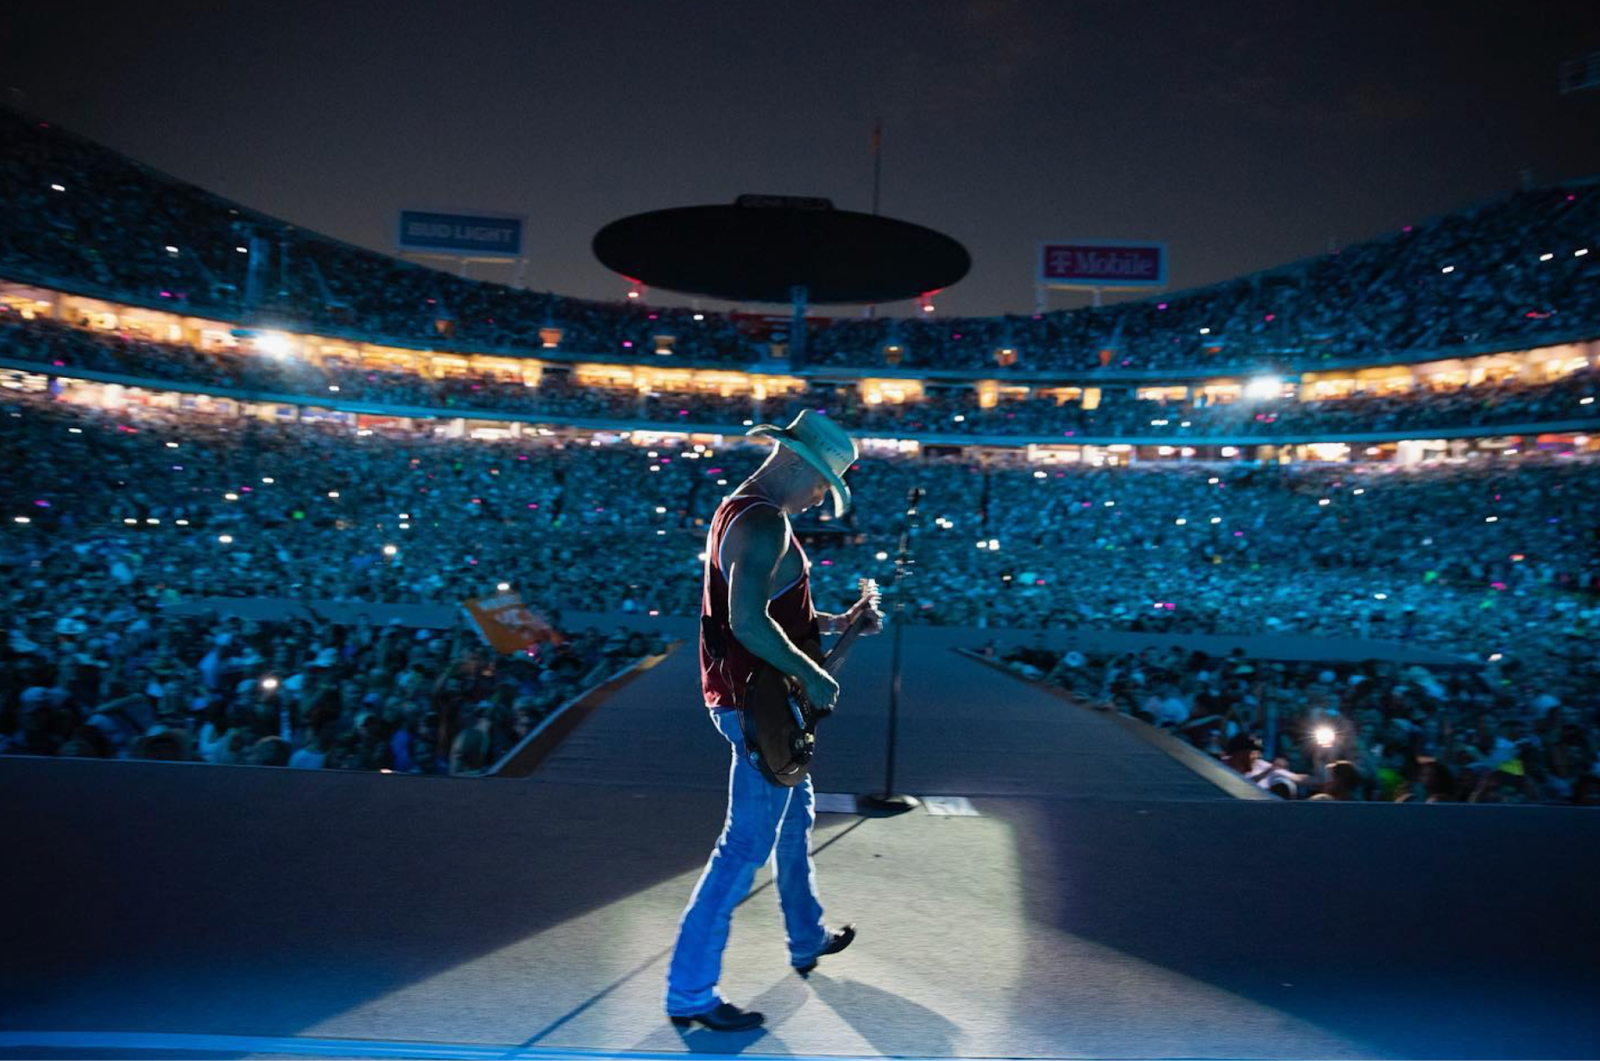 A photo taken behind singer Kenny Chesney on stage performing in front of a live audience.